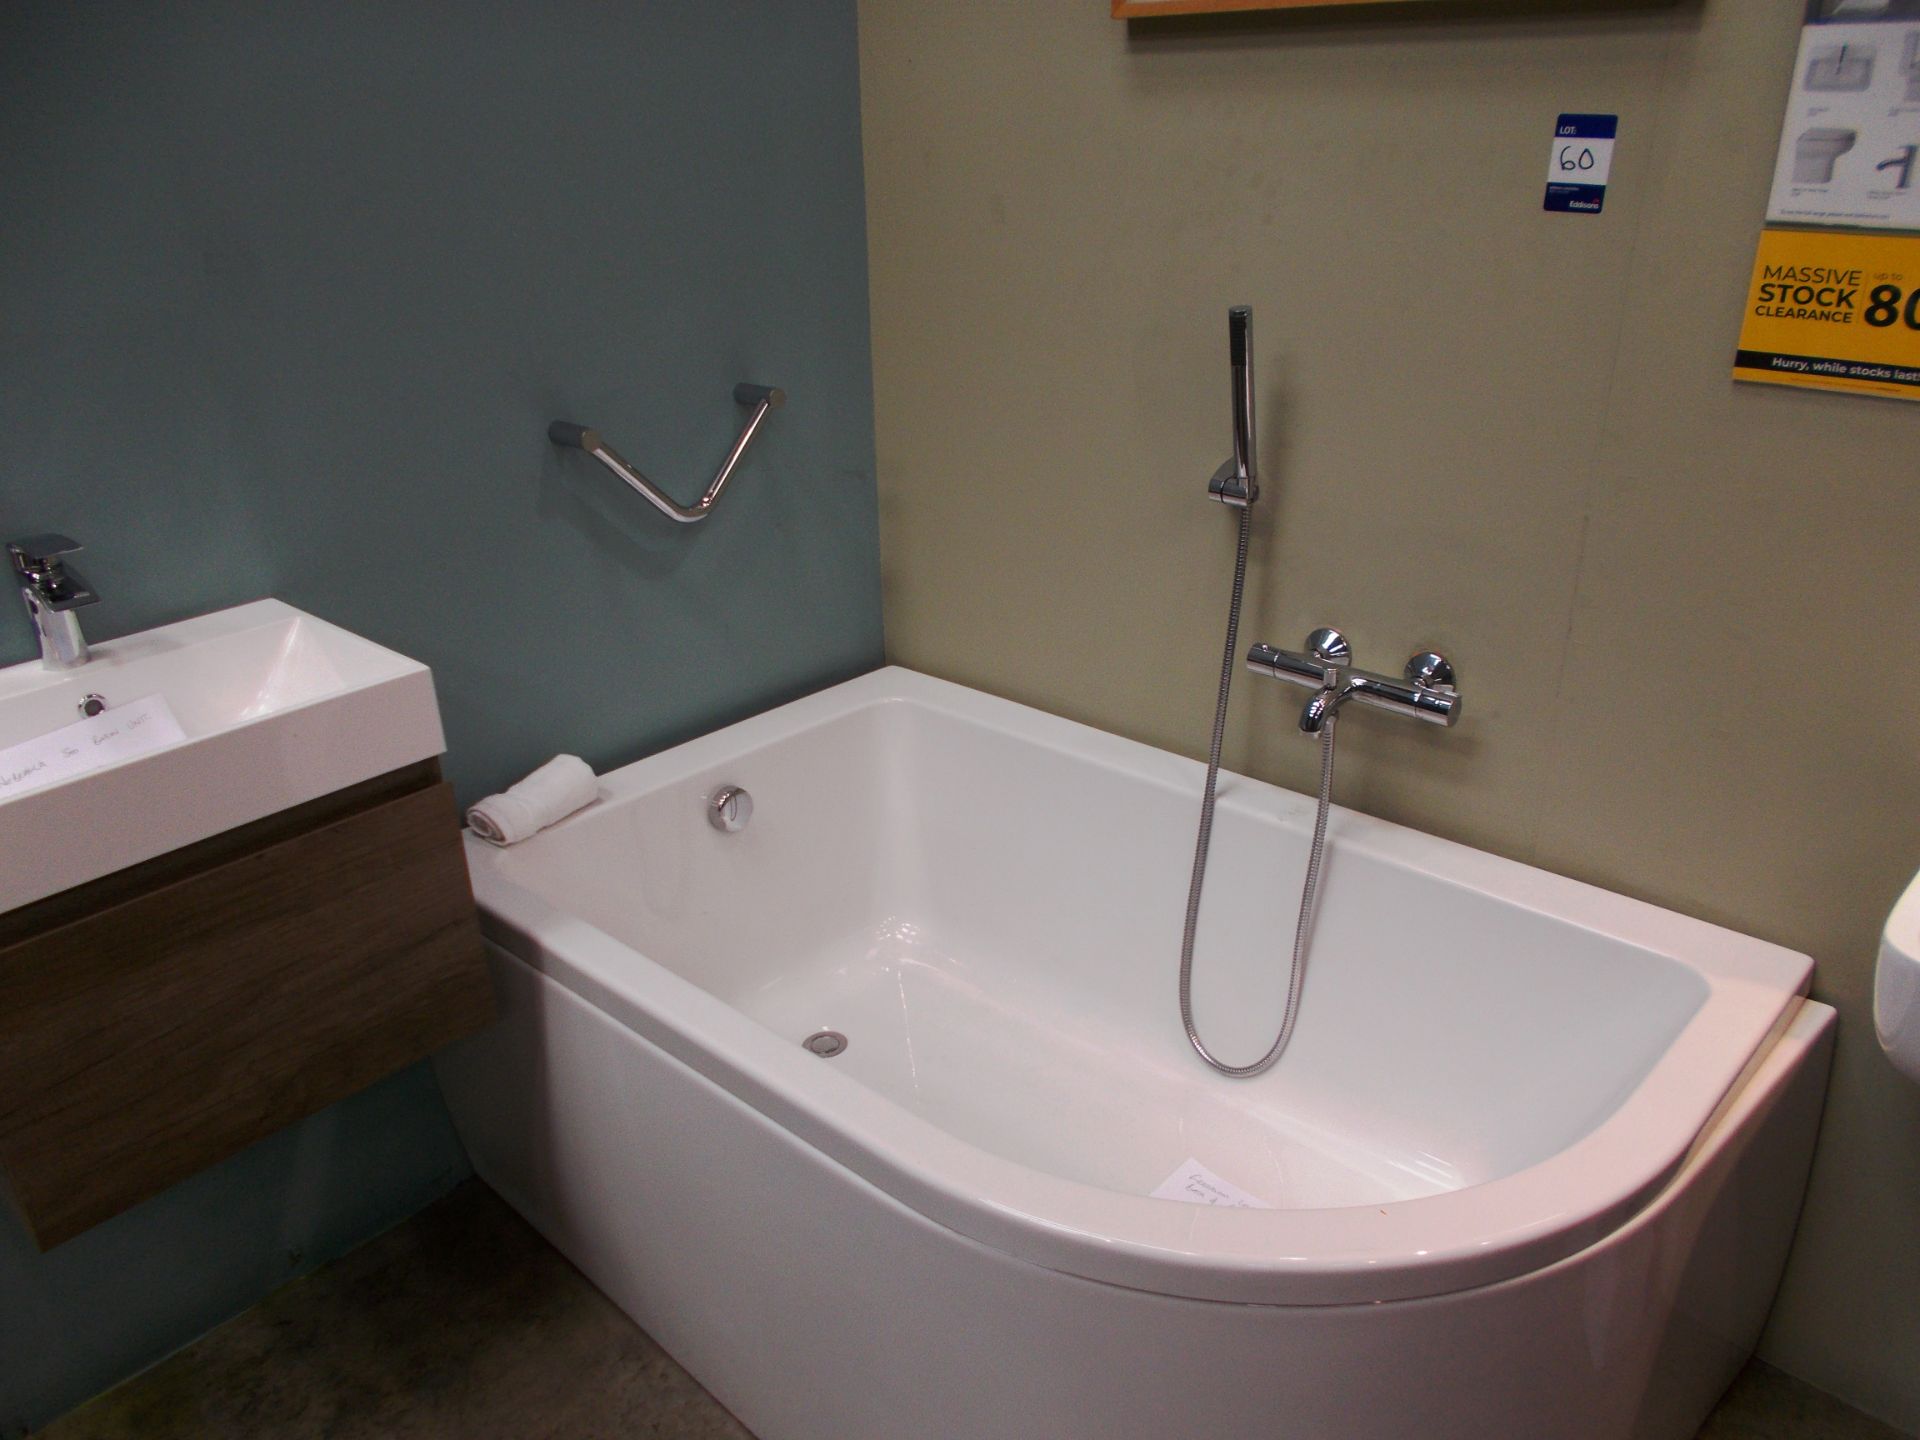 Freedome left hand bath and panel. RRP £622